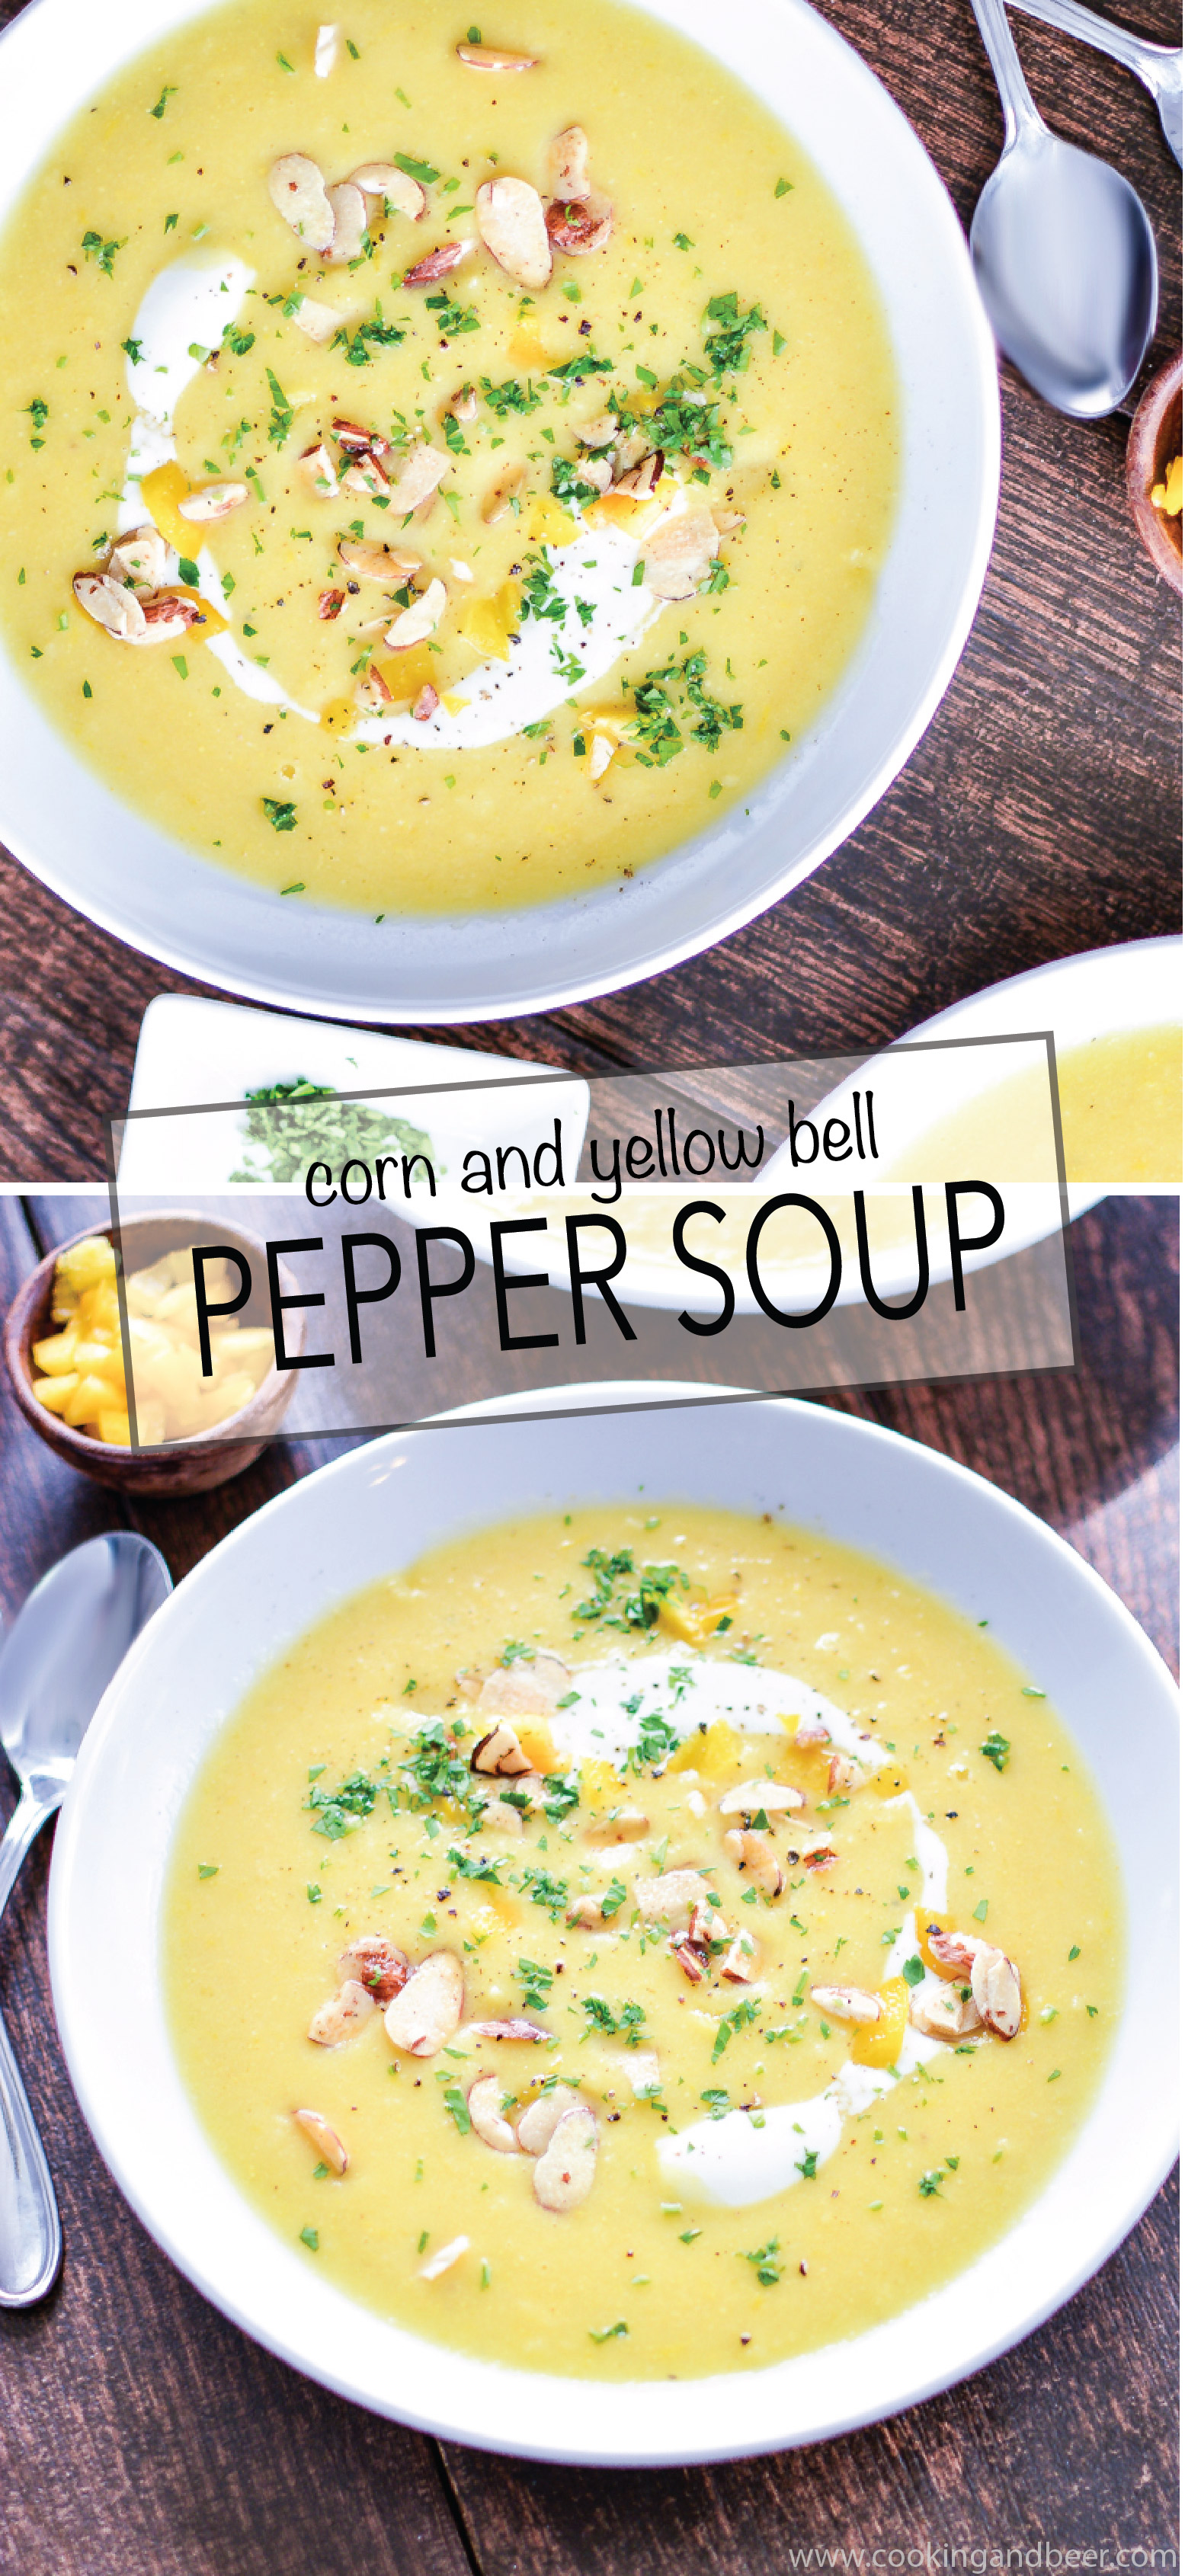 Corn and Yellow Bell Pepper Soup recipe (vegan) is the perfect summertime soup as it highlights fresh produce and delicious ingredients! | www.cookingandbeer.com